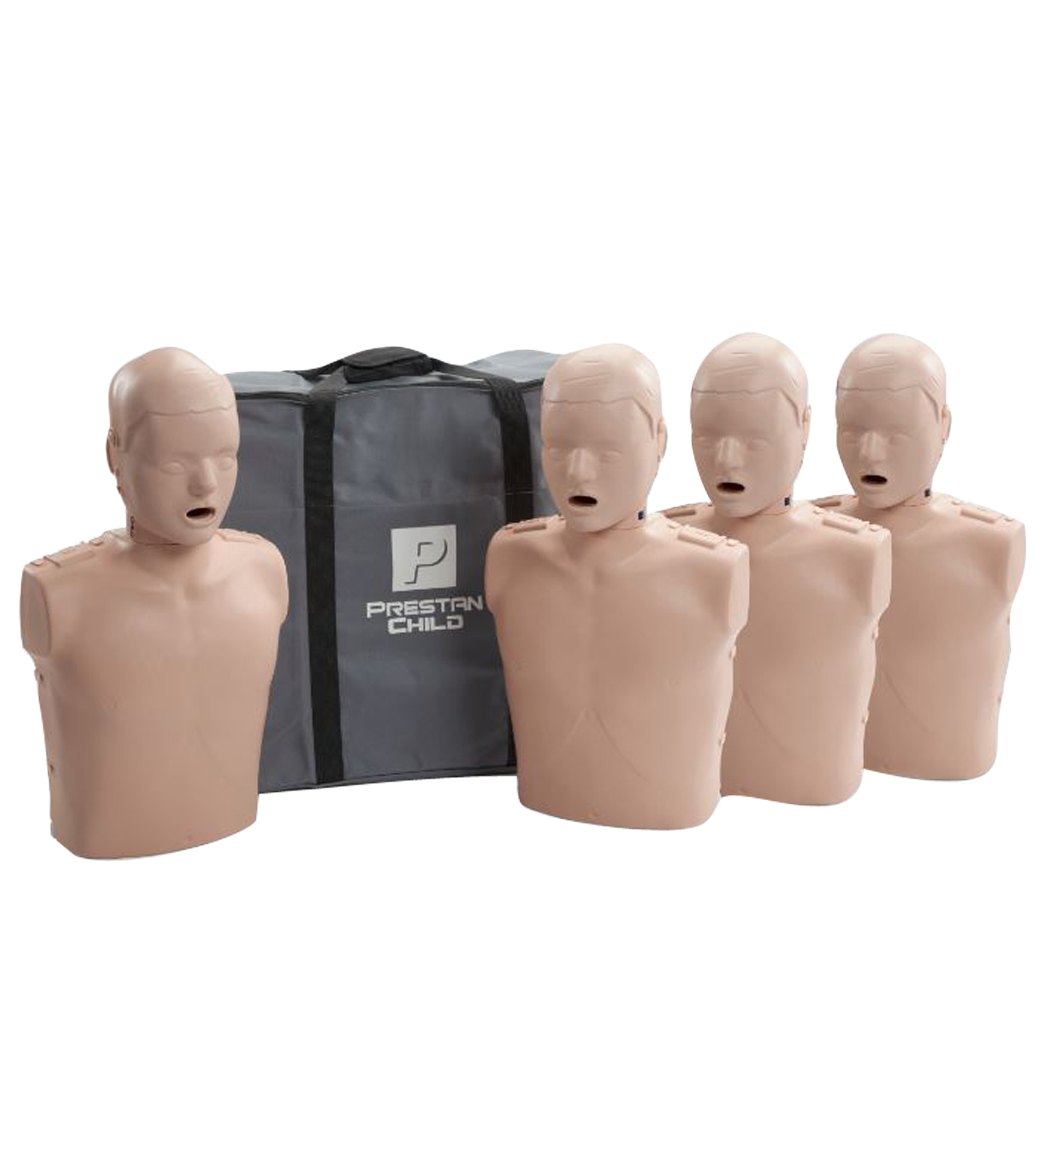 Prestan Professional Child CPR-AED Training Manikins 4 Pack & Kit